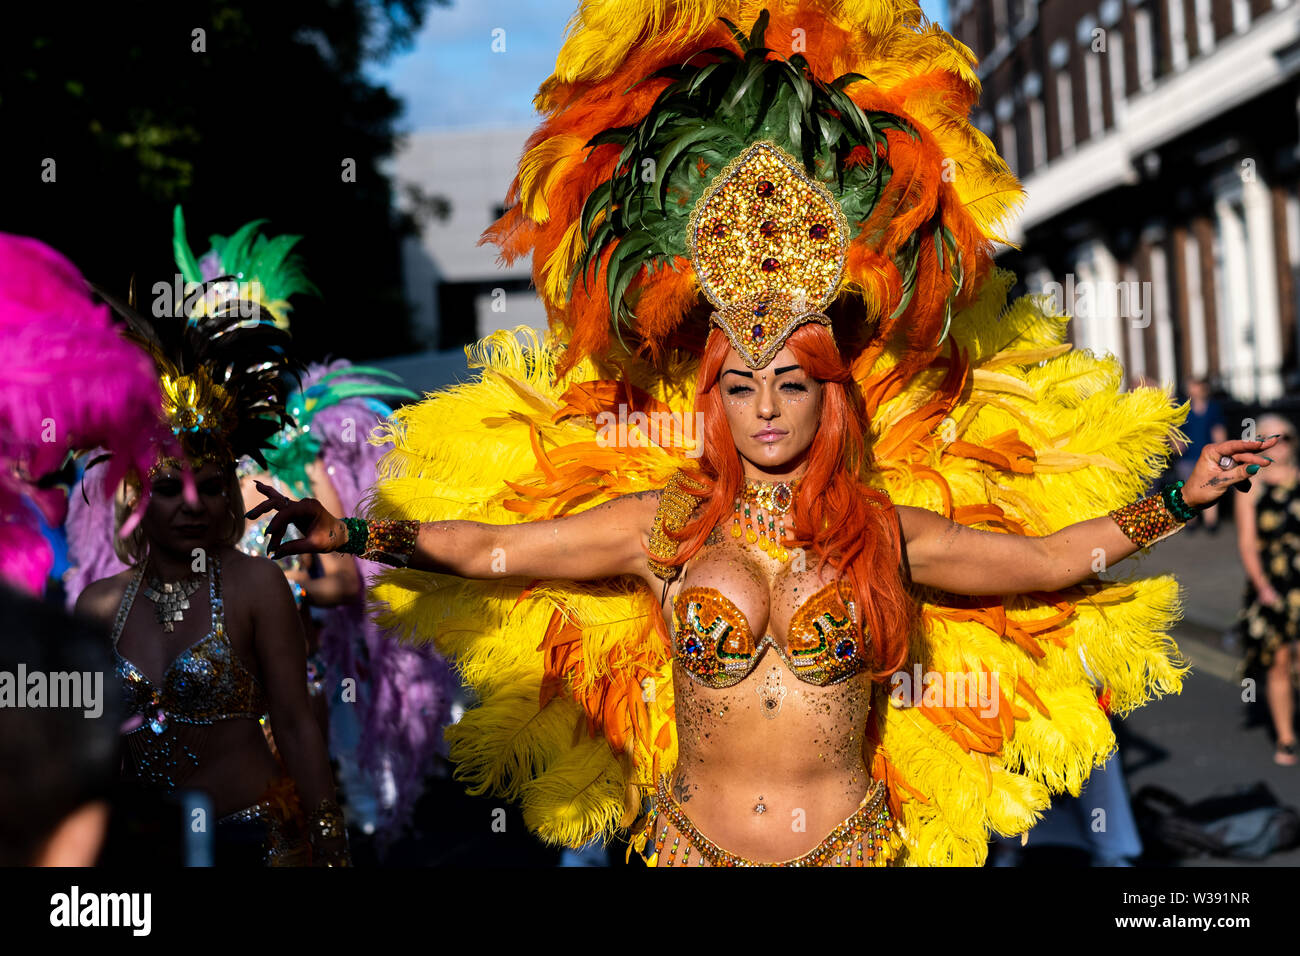 Liverpool, UK. 13th July, 2019. Brazilica Festival carnival parade, which is the largest celebration of Brazilian culture in the United Kingdom, has taken place on Saturday, July 13, 2019 in Liverpool, in the north west of England. The event has been held annually since 2008 and attracts thousands of spectators. Credit: Christopher Middleton/Alamy Live News Stock Photo